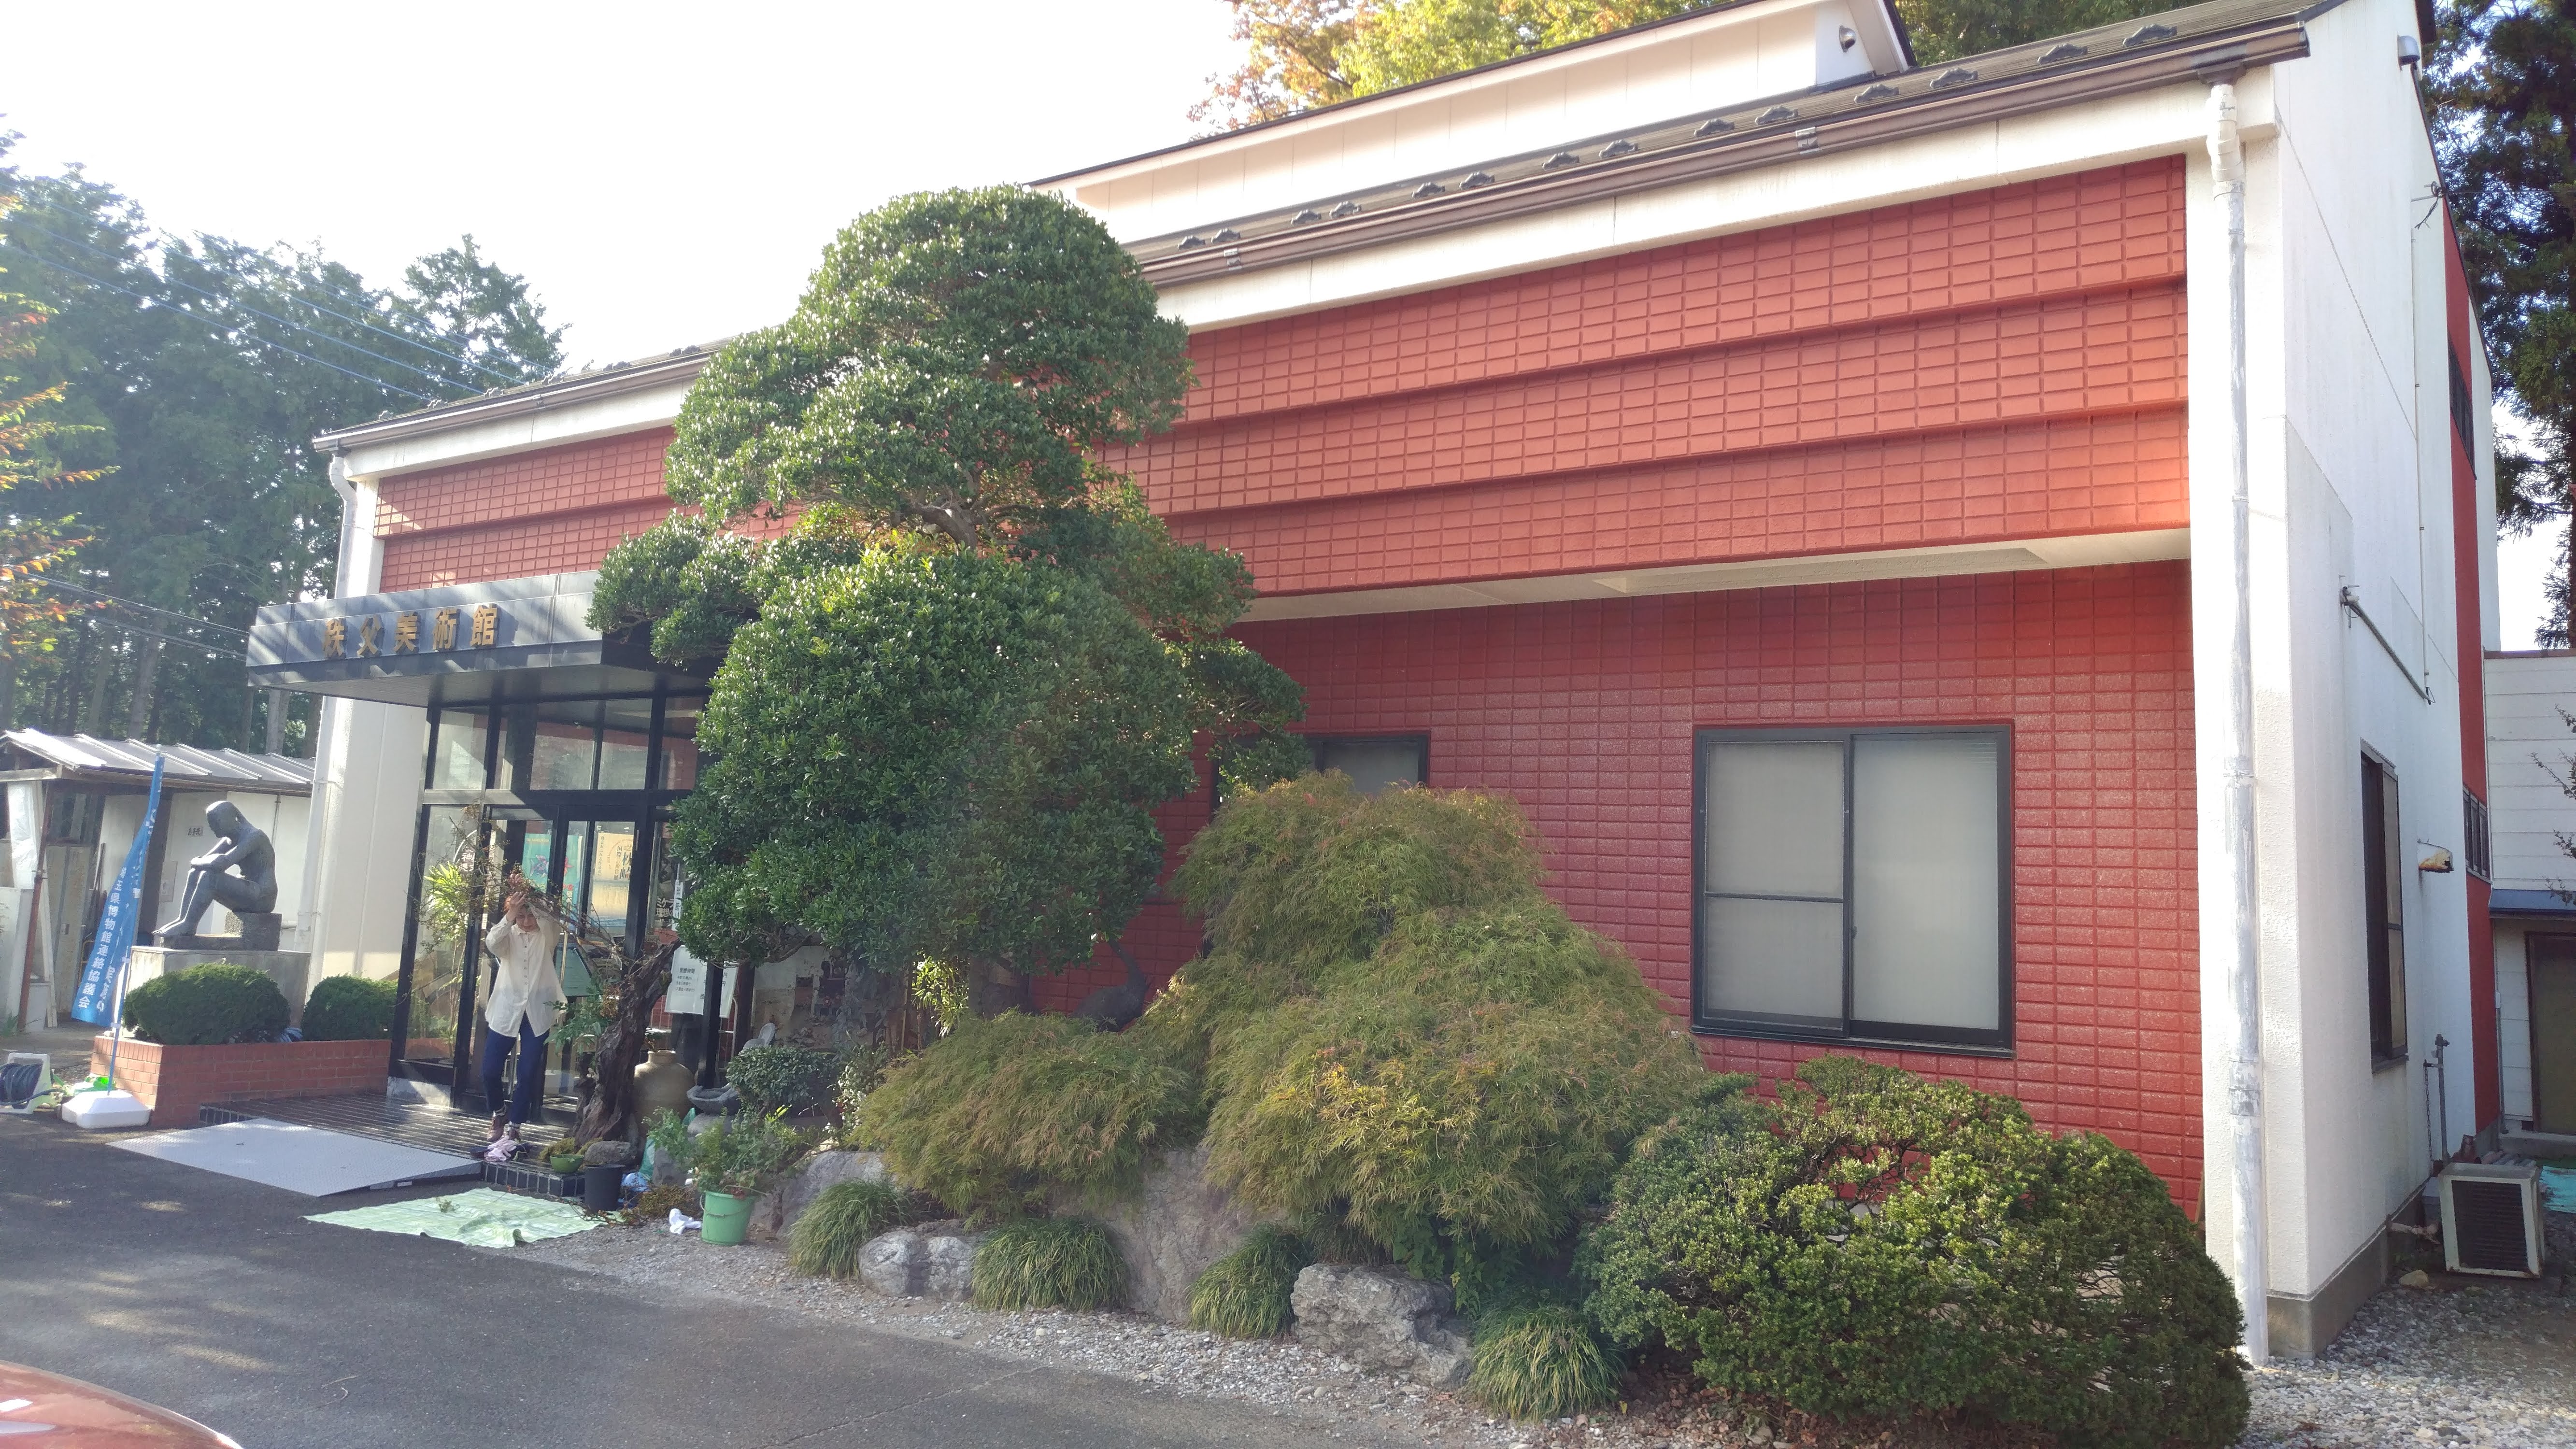 a small reddish building with small manicured trees outside